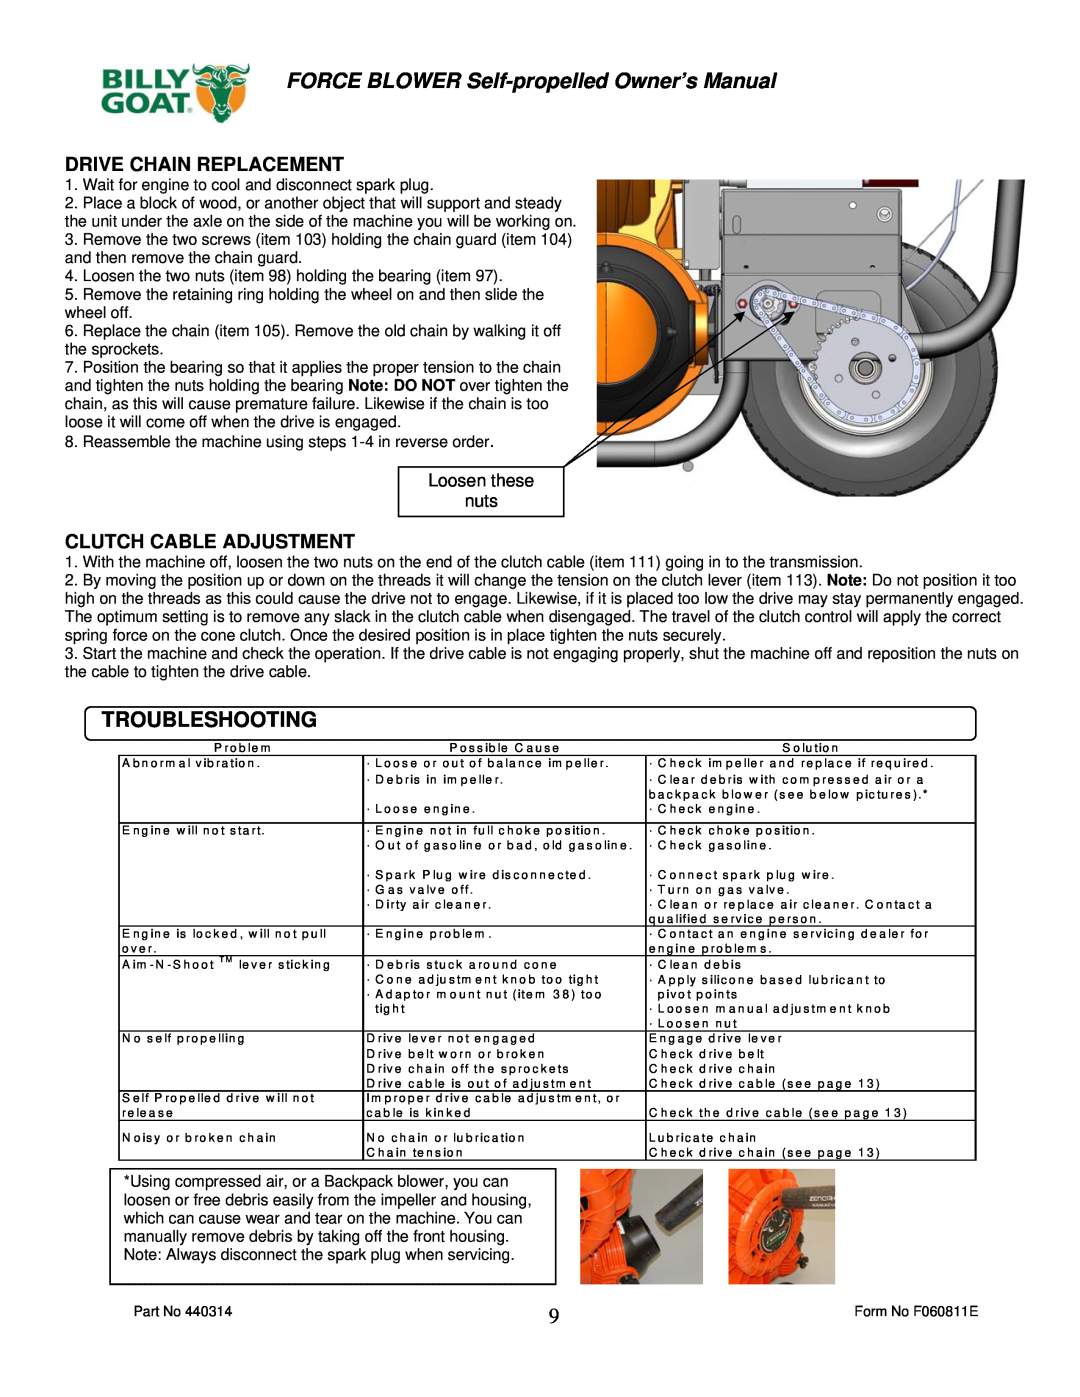 Billy Goat F902SPH, F902SPS, F1302SPH Troubleshooting, FORCE BLOWER Self-propelled Owner’s Manual, Drive Chain Replacement 